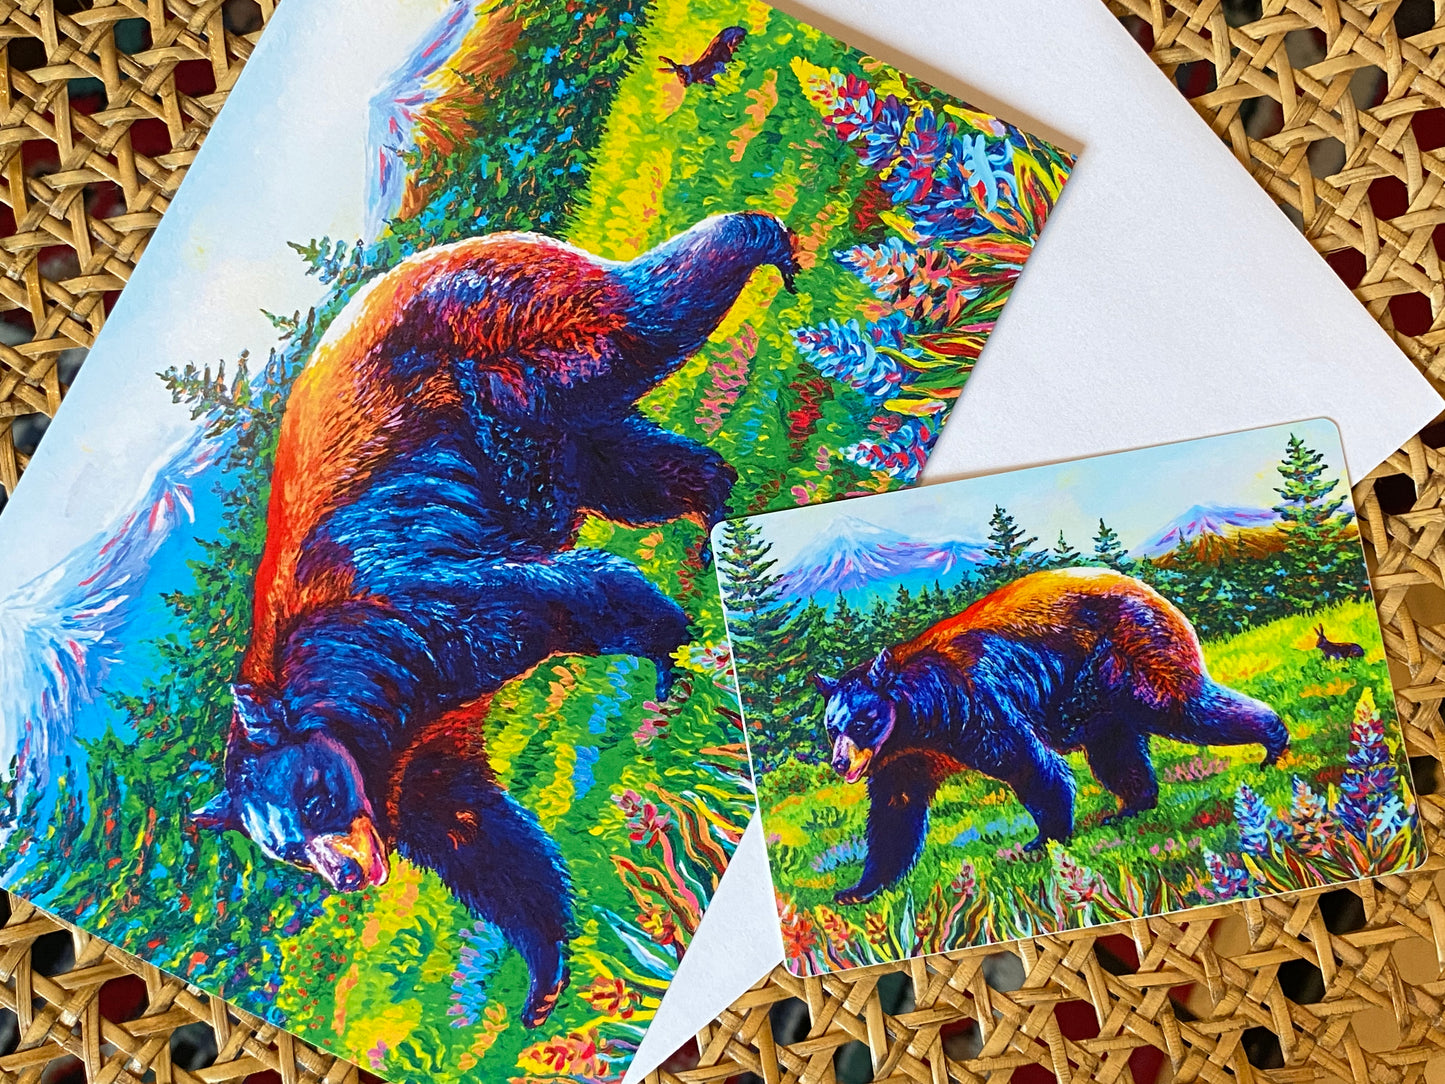 "Are we there yet?" Bear and Rabbit Greeting Card for all occasion - Fine Art Greeting Card